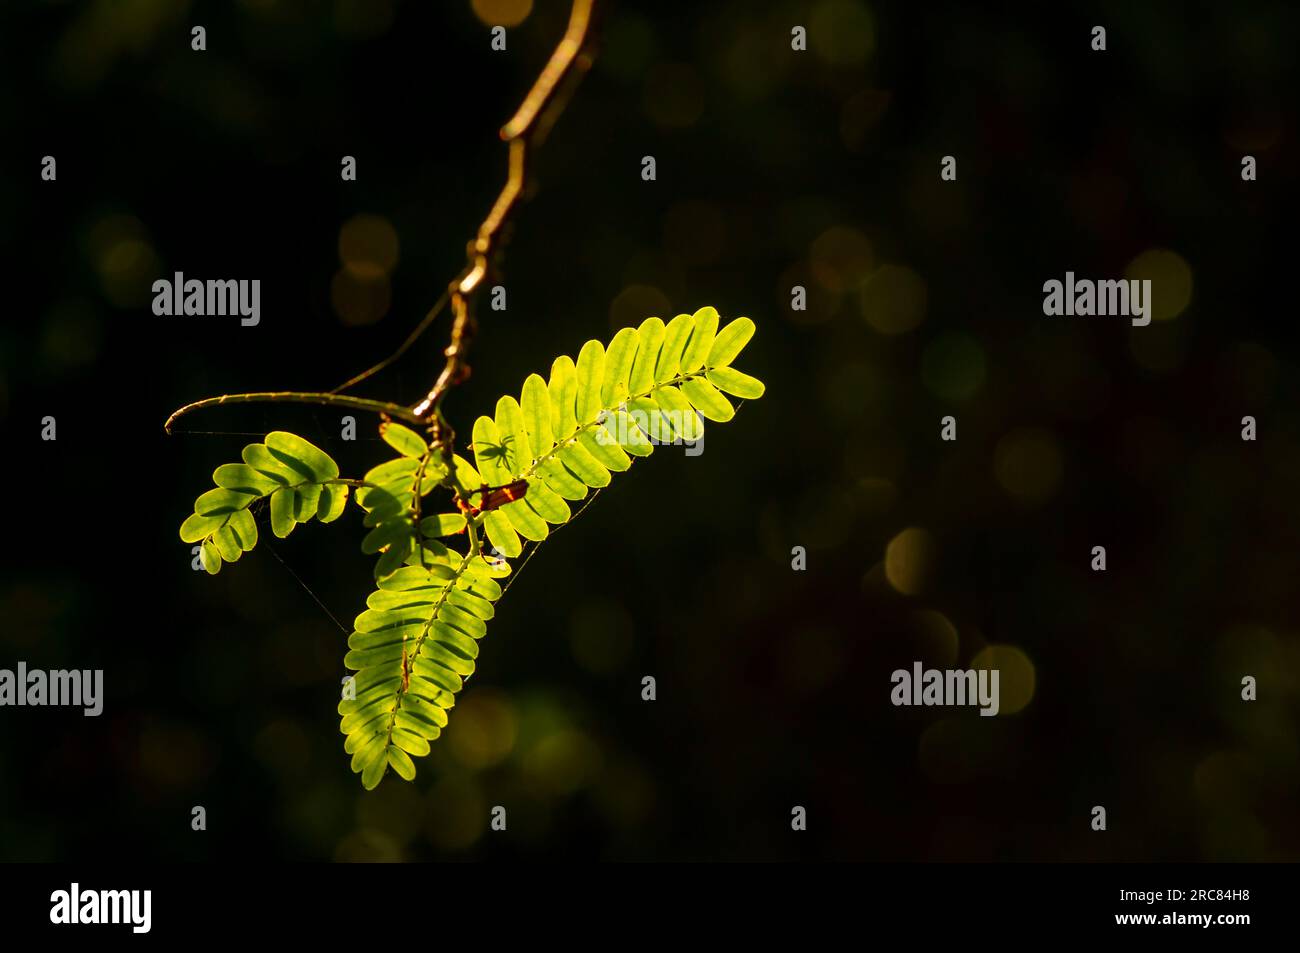 River tamarind (Leucaena leucocephala) green leaves and spider silhouette, with dark background for natural background. Stock Photo